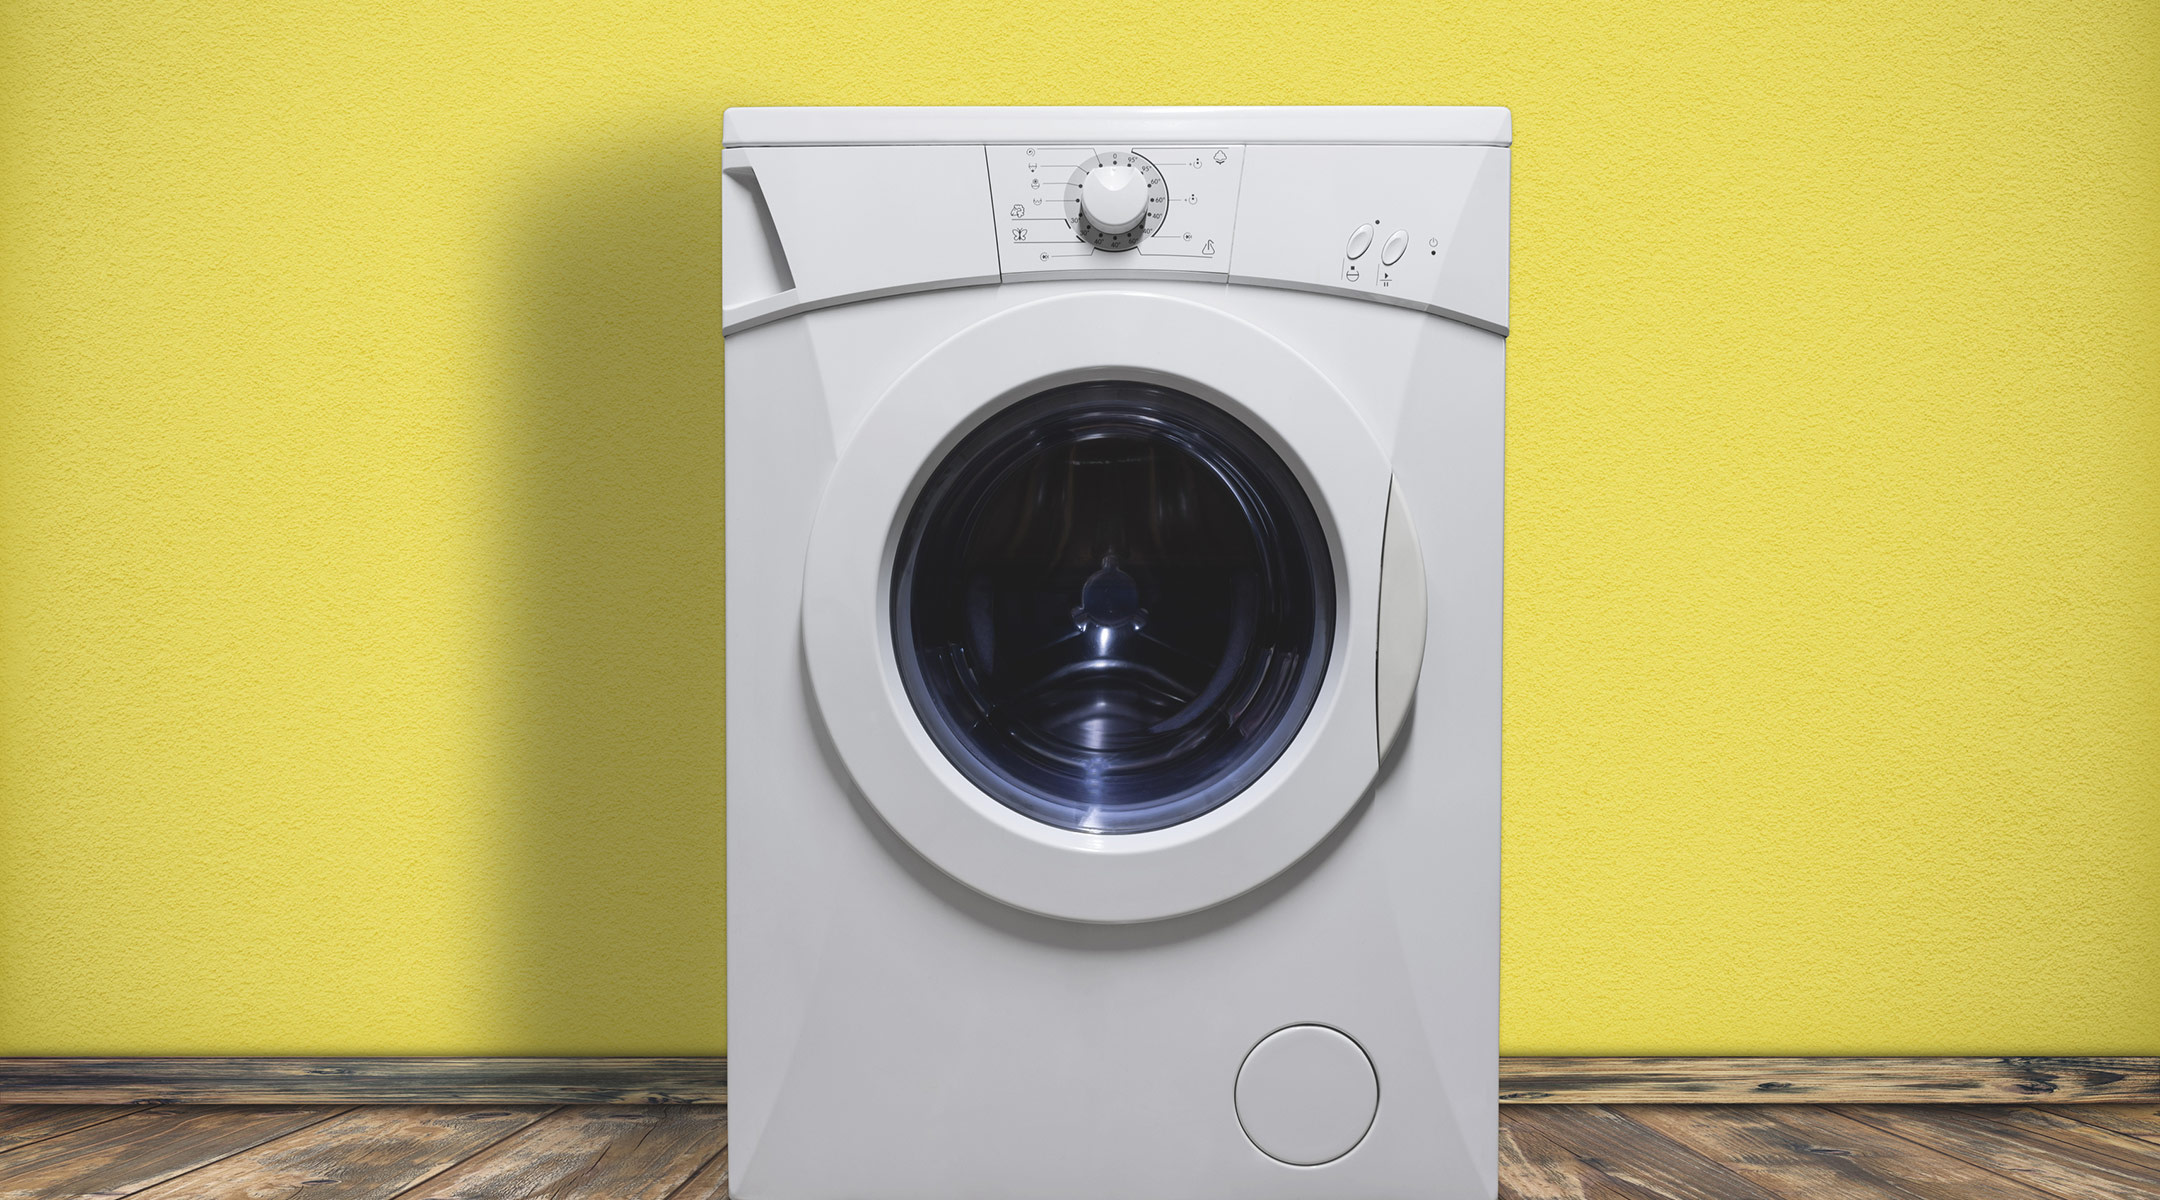 washing machine in front of a yellow wall